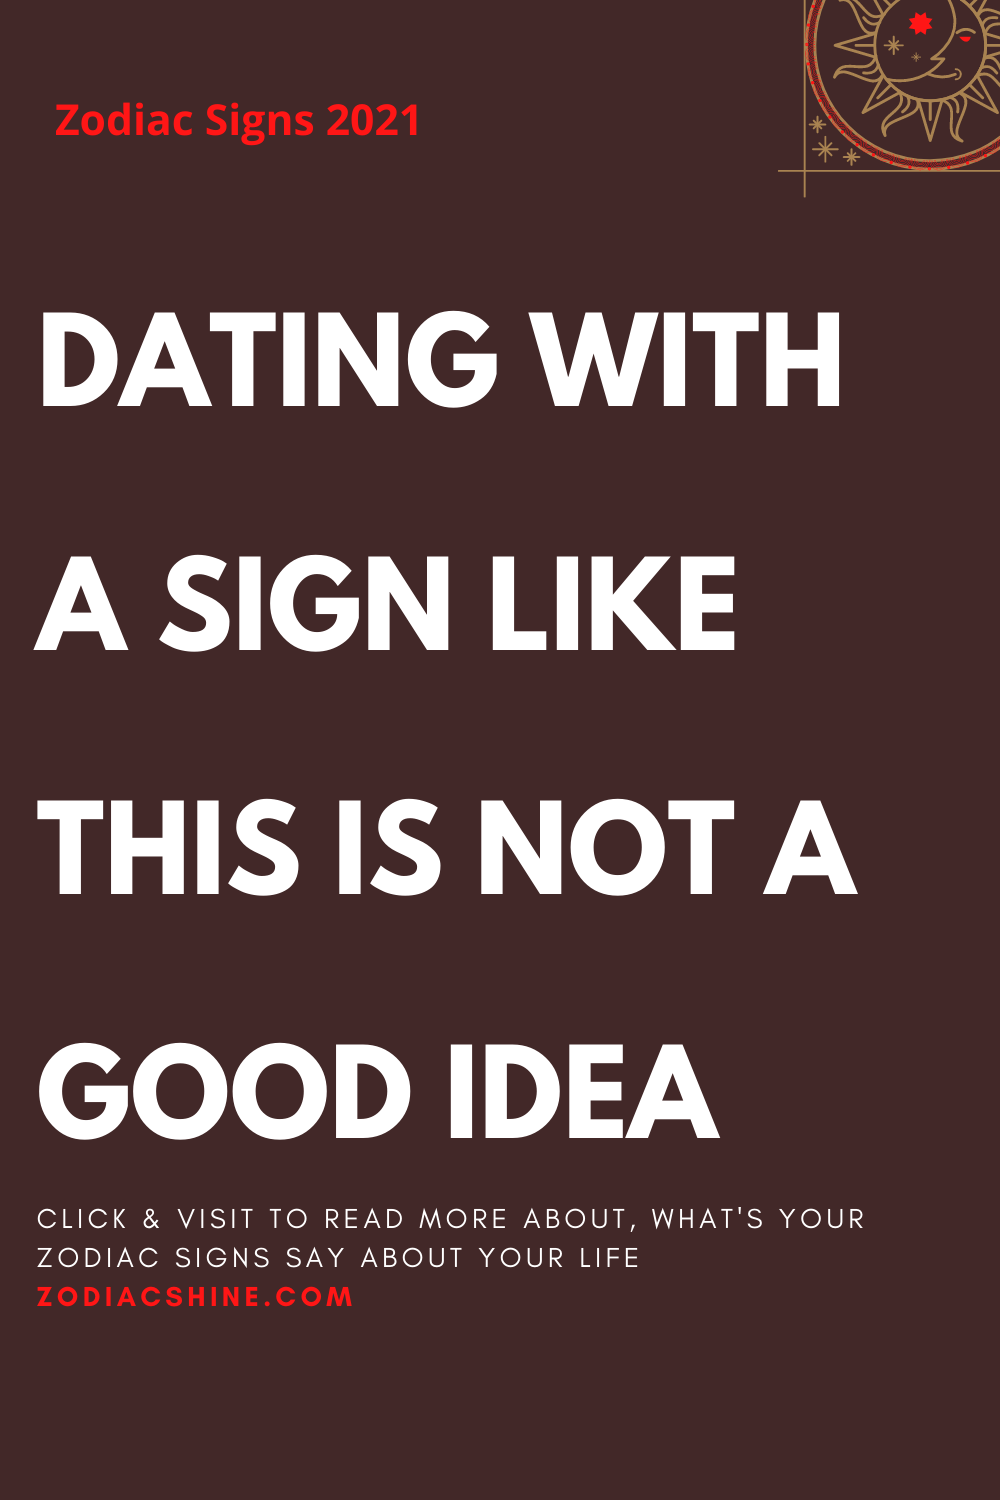 DATING WITH A SIGN LIKE THIS IS NOT A GOOD IDEA